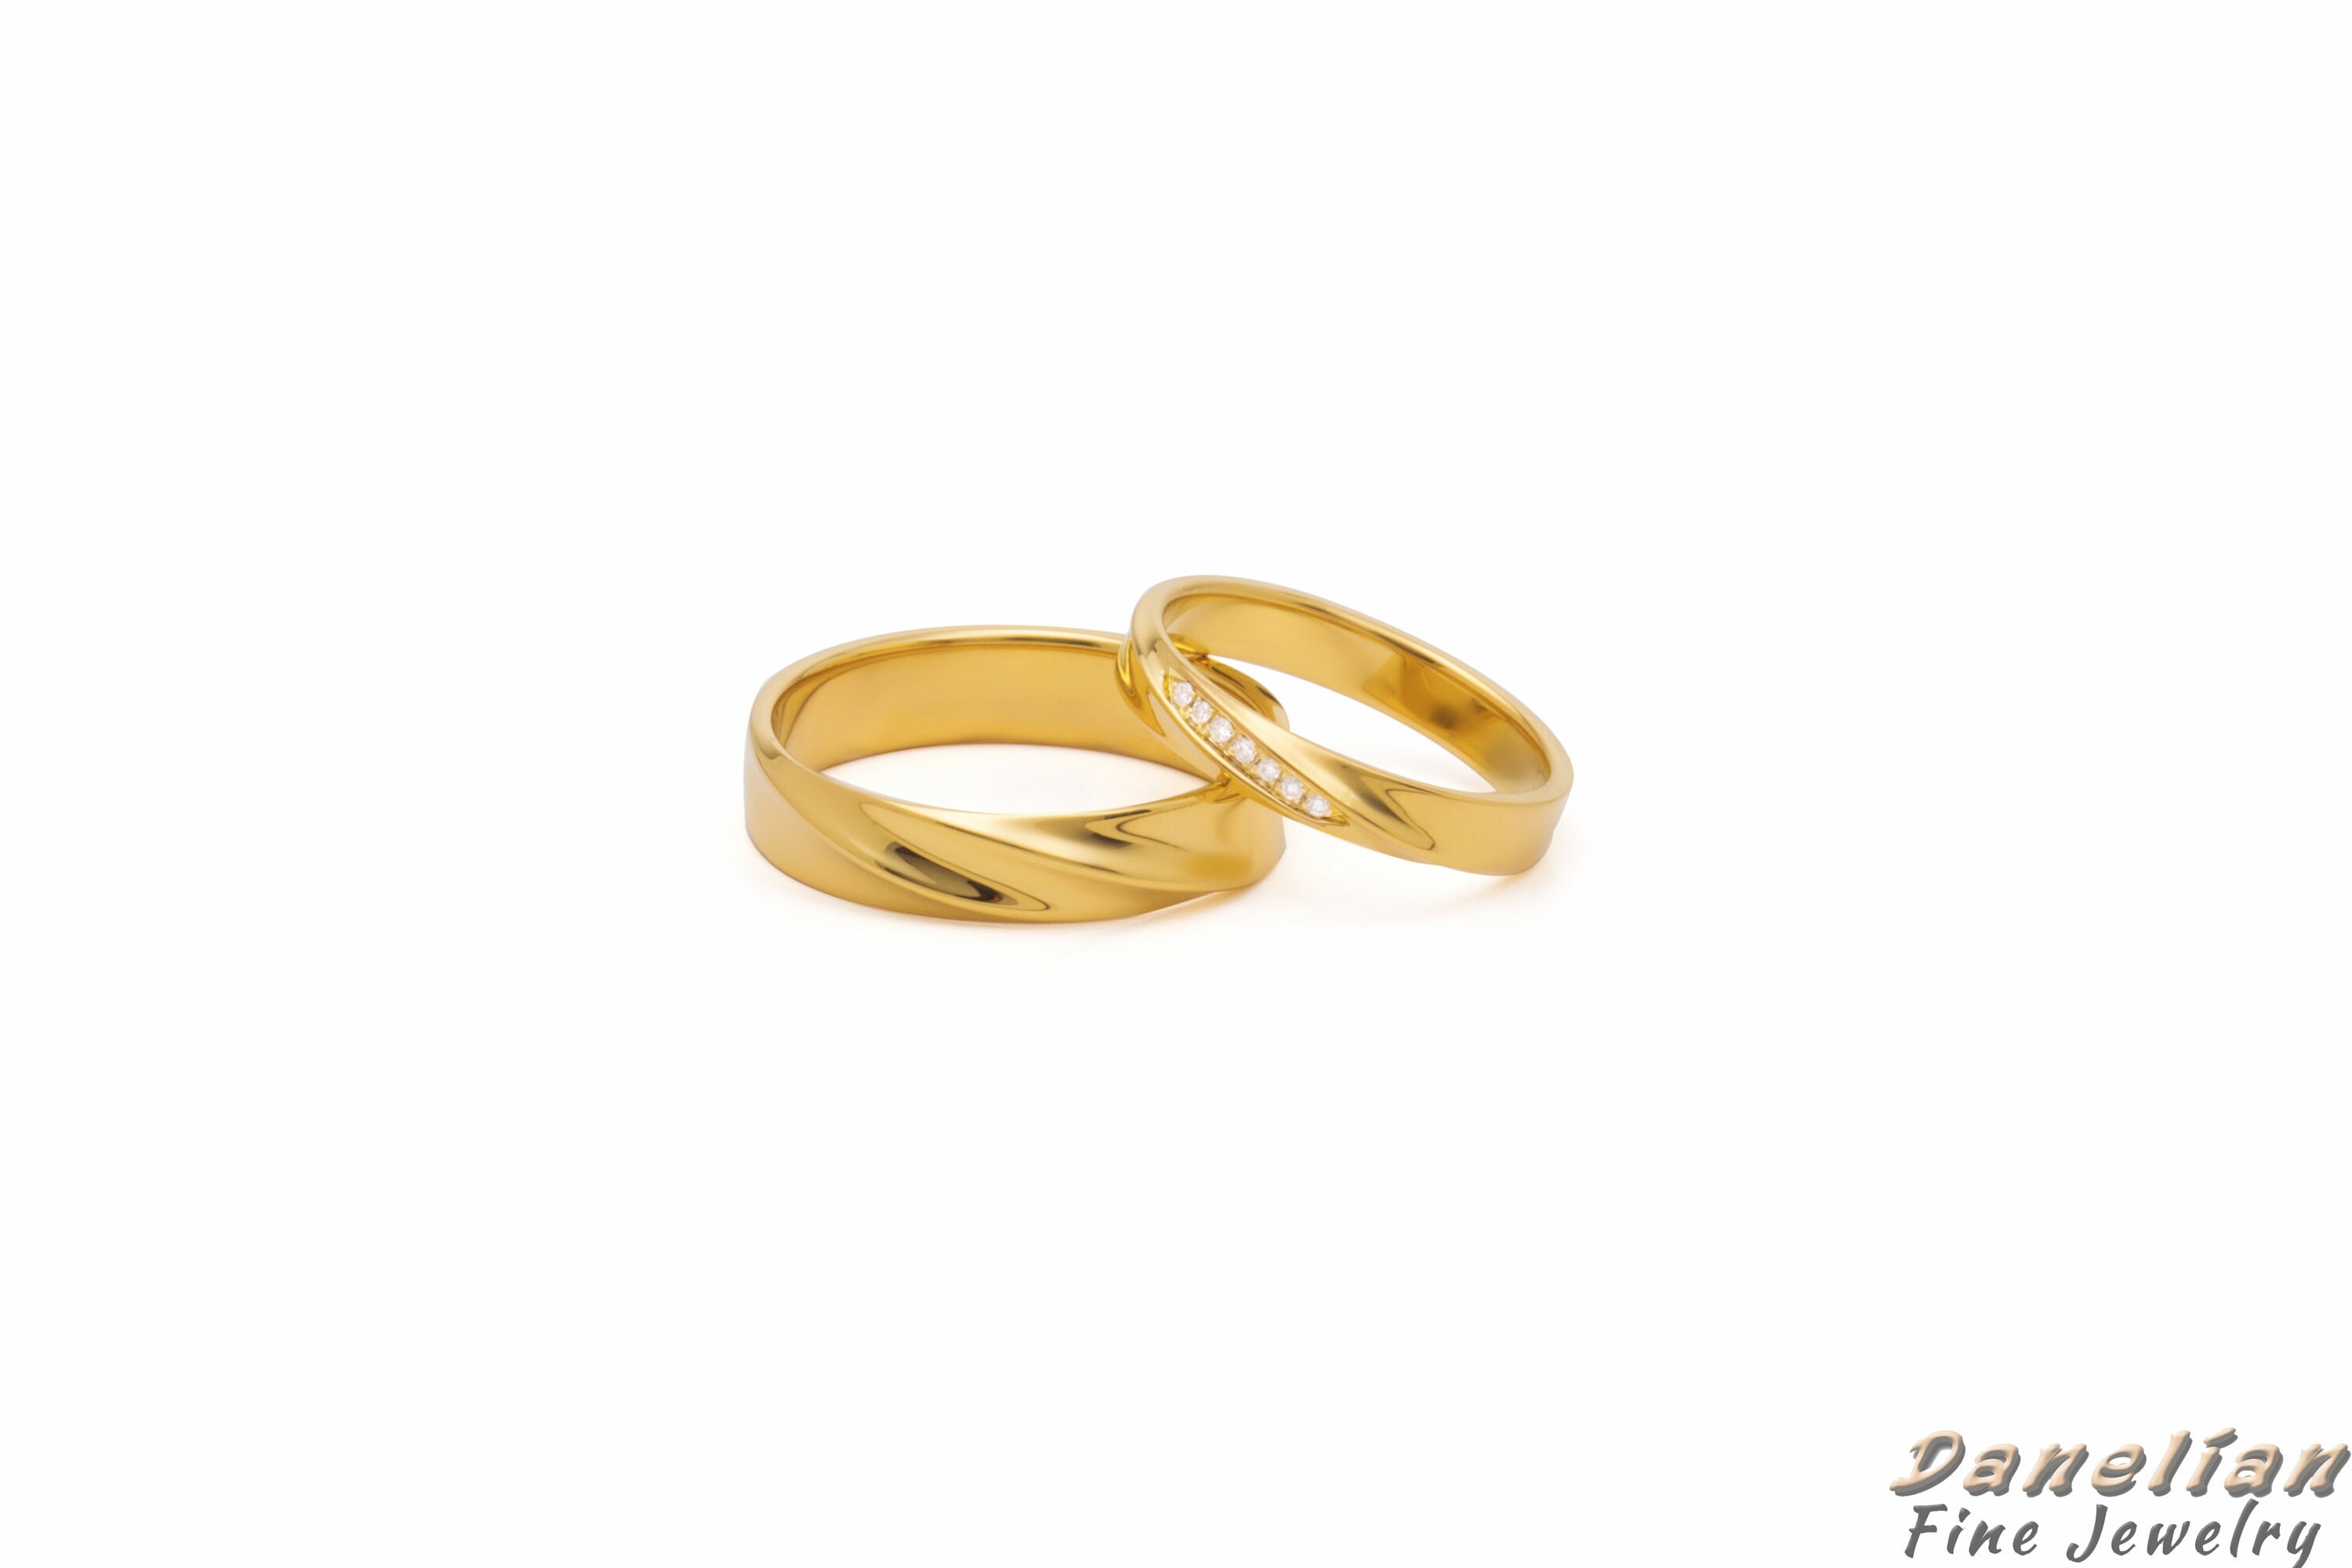 Jass Manak Sex Videos - Wedding Ring Set Wedding Band His and Her Couple Wedding - Etsy